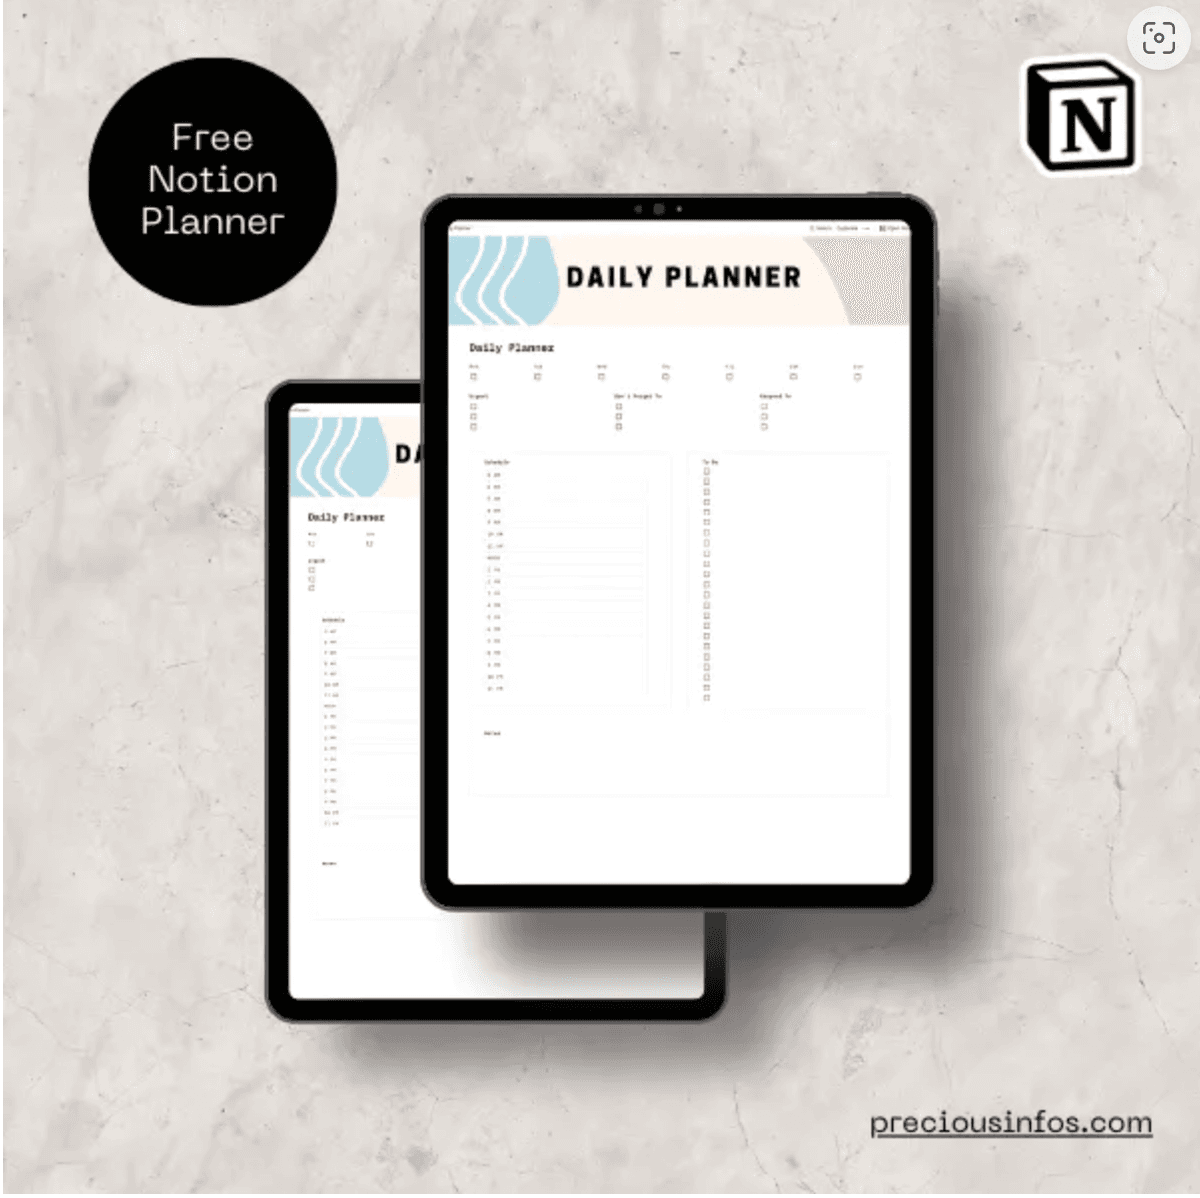 Free daily planner notion template